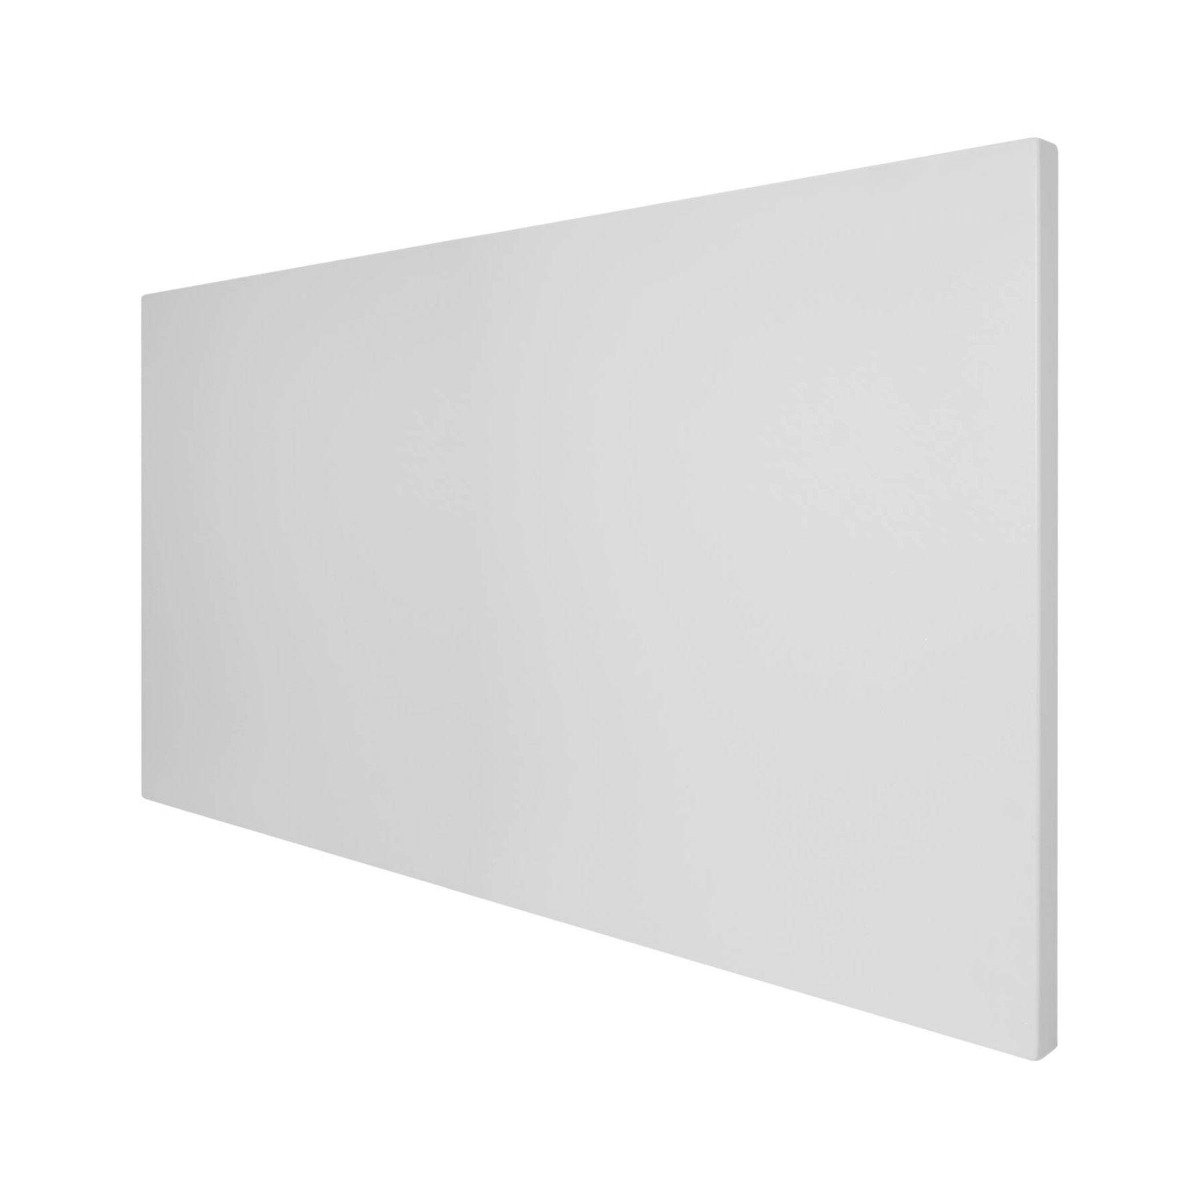 Ecostrad Opus IR Infrared Wall Panel with Remote - 900w (1205 x 755mm)